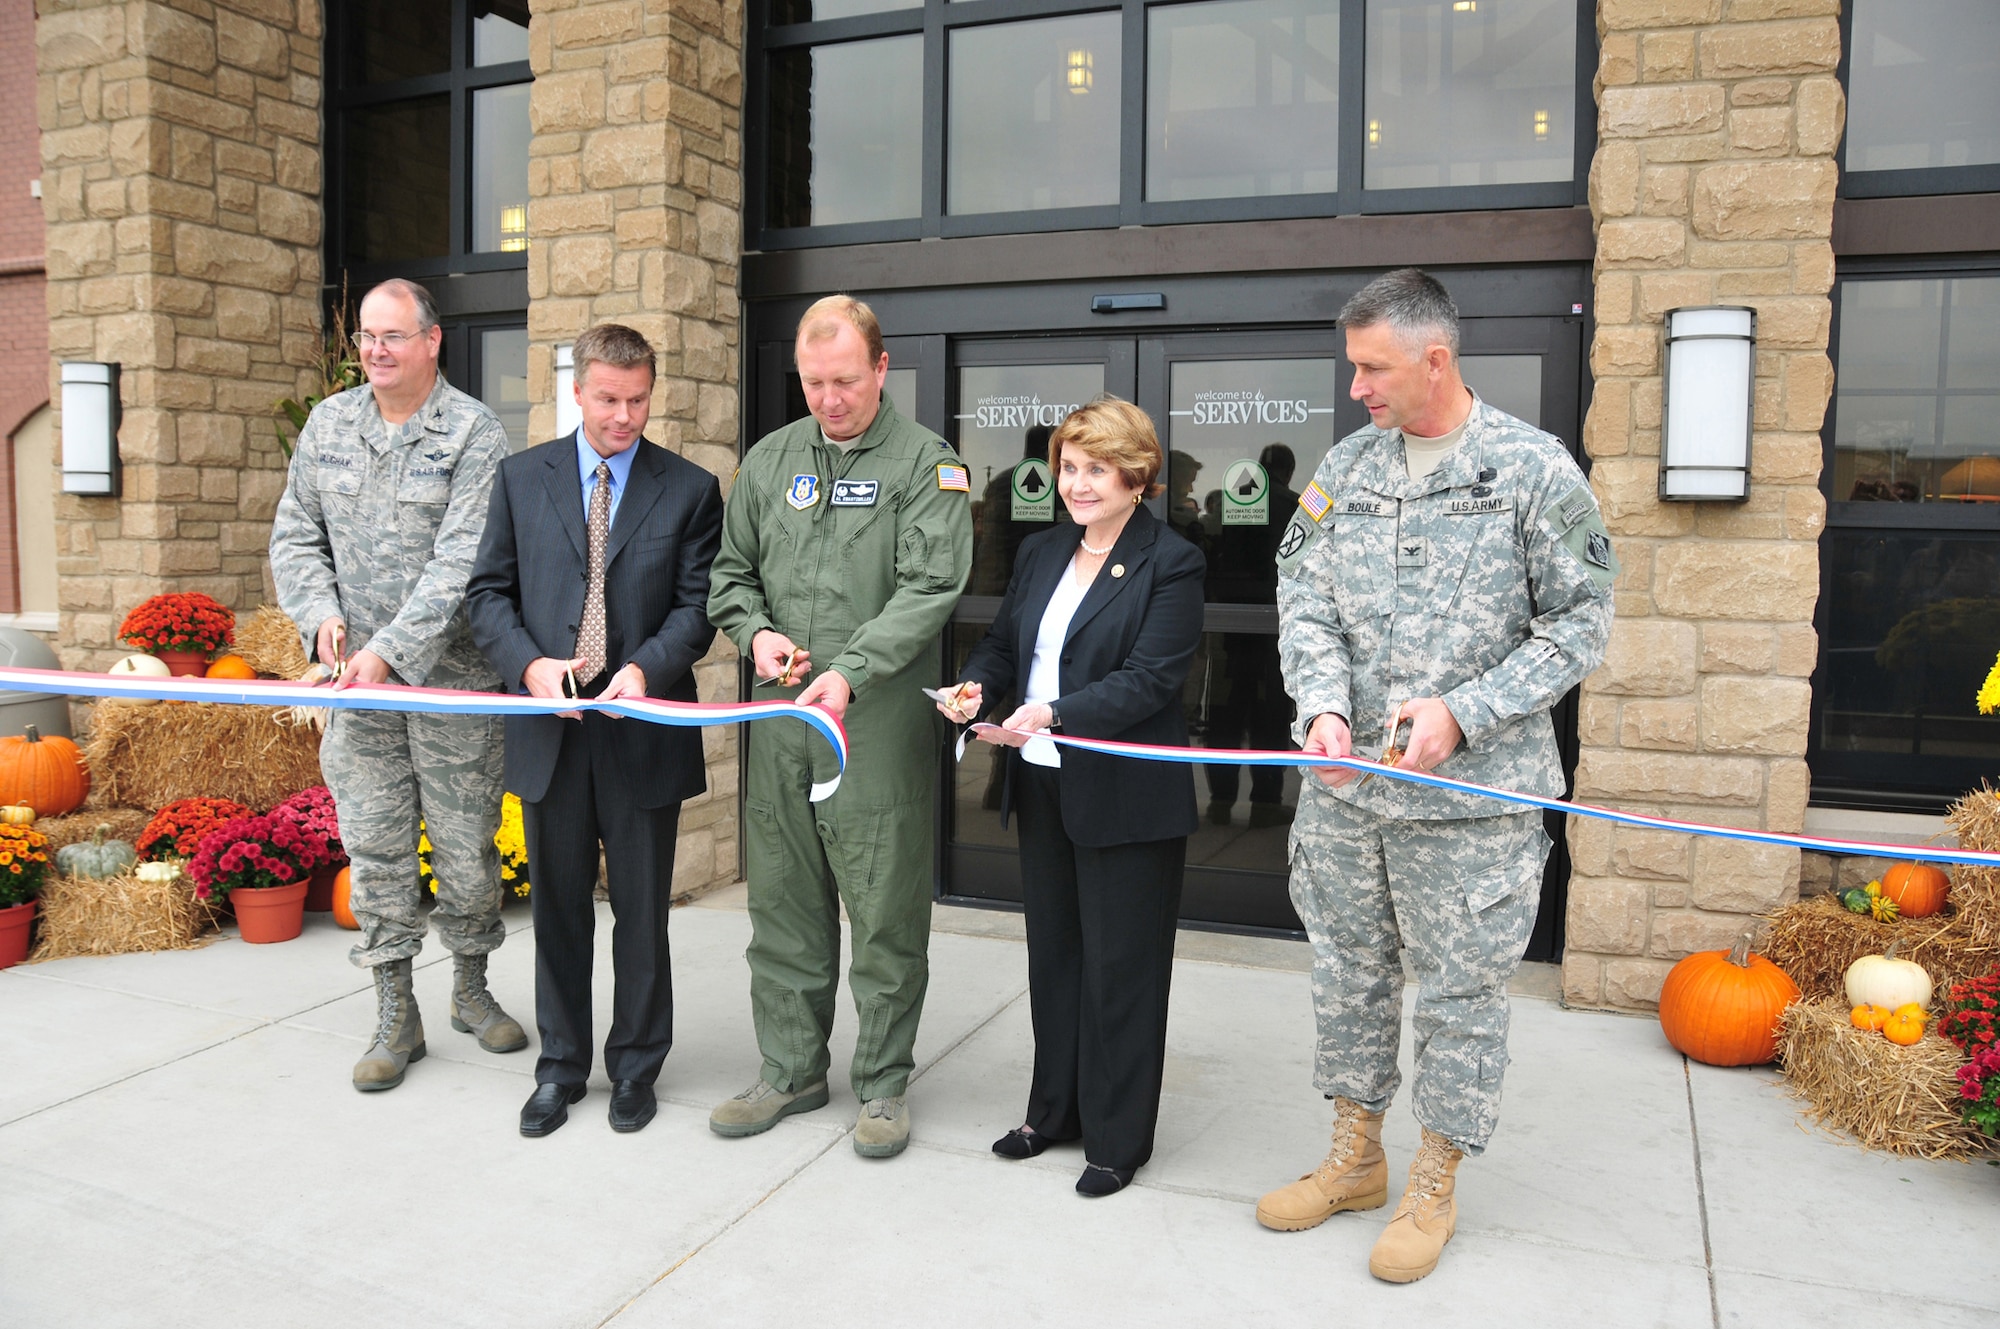 NIAGARA FALLS AIR RESERVE STATION, N.Y. - The Niagara Falls ARS officially opened a new $16 million Airman's lodging facility here October 9, 2009.  Pictured cutting the ceremonial ribbon are (left to right) Col. Timothy Vaughan, 107th Mission Support Group commander; Congressman Christopher Lee, NY 26th District; Col. Allan Swartzmiller, 914th Airlift Wing and installation commander; Congresswoman Louise Slaughter, NY 28th District; Col. John Boulé, Commander of U.S. Army Corp of Engineers NY District. (U.S. Air Force photo by Staff Sgt. Joseph McKee)